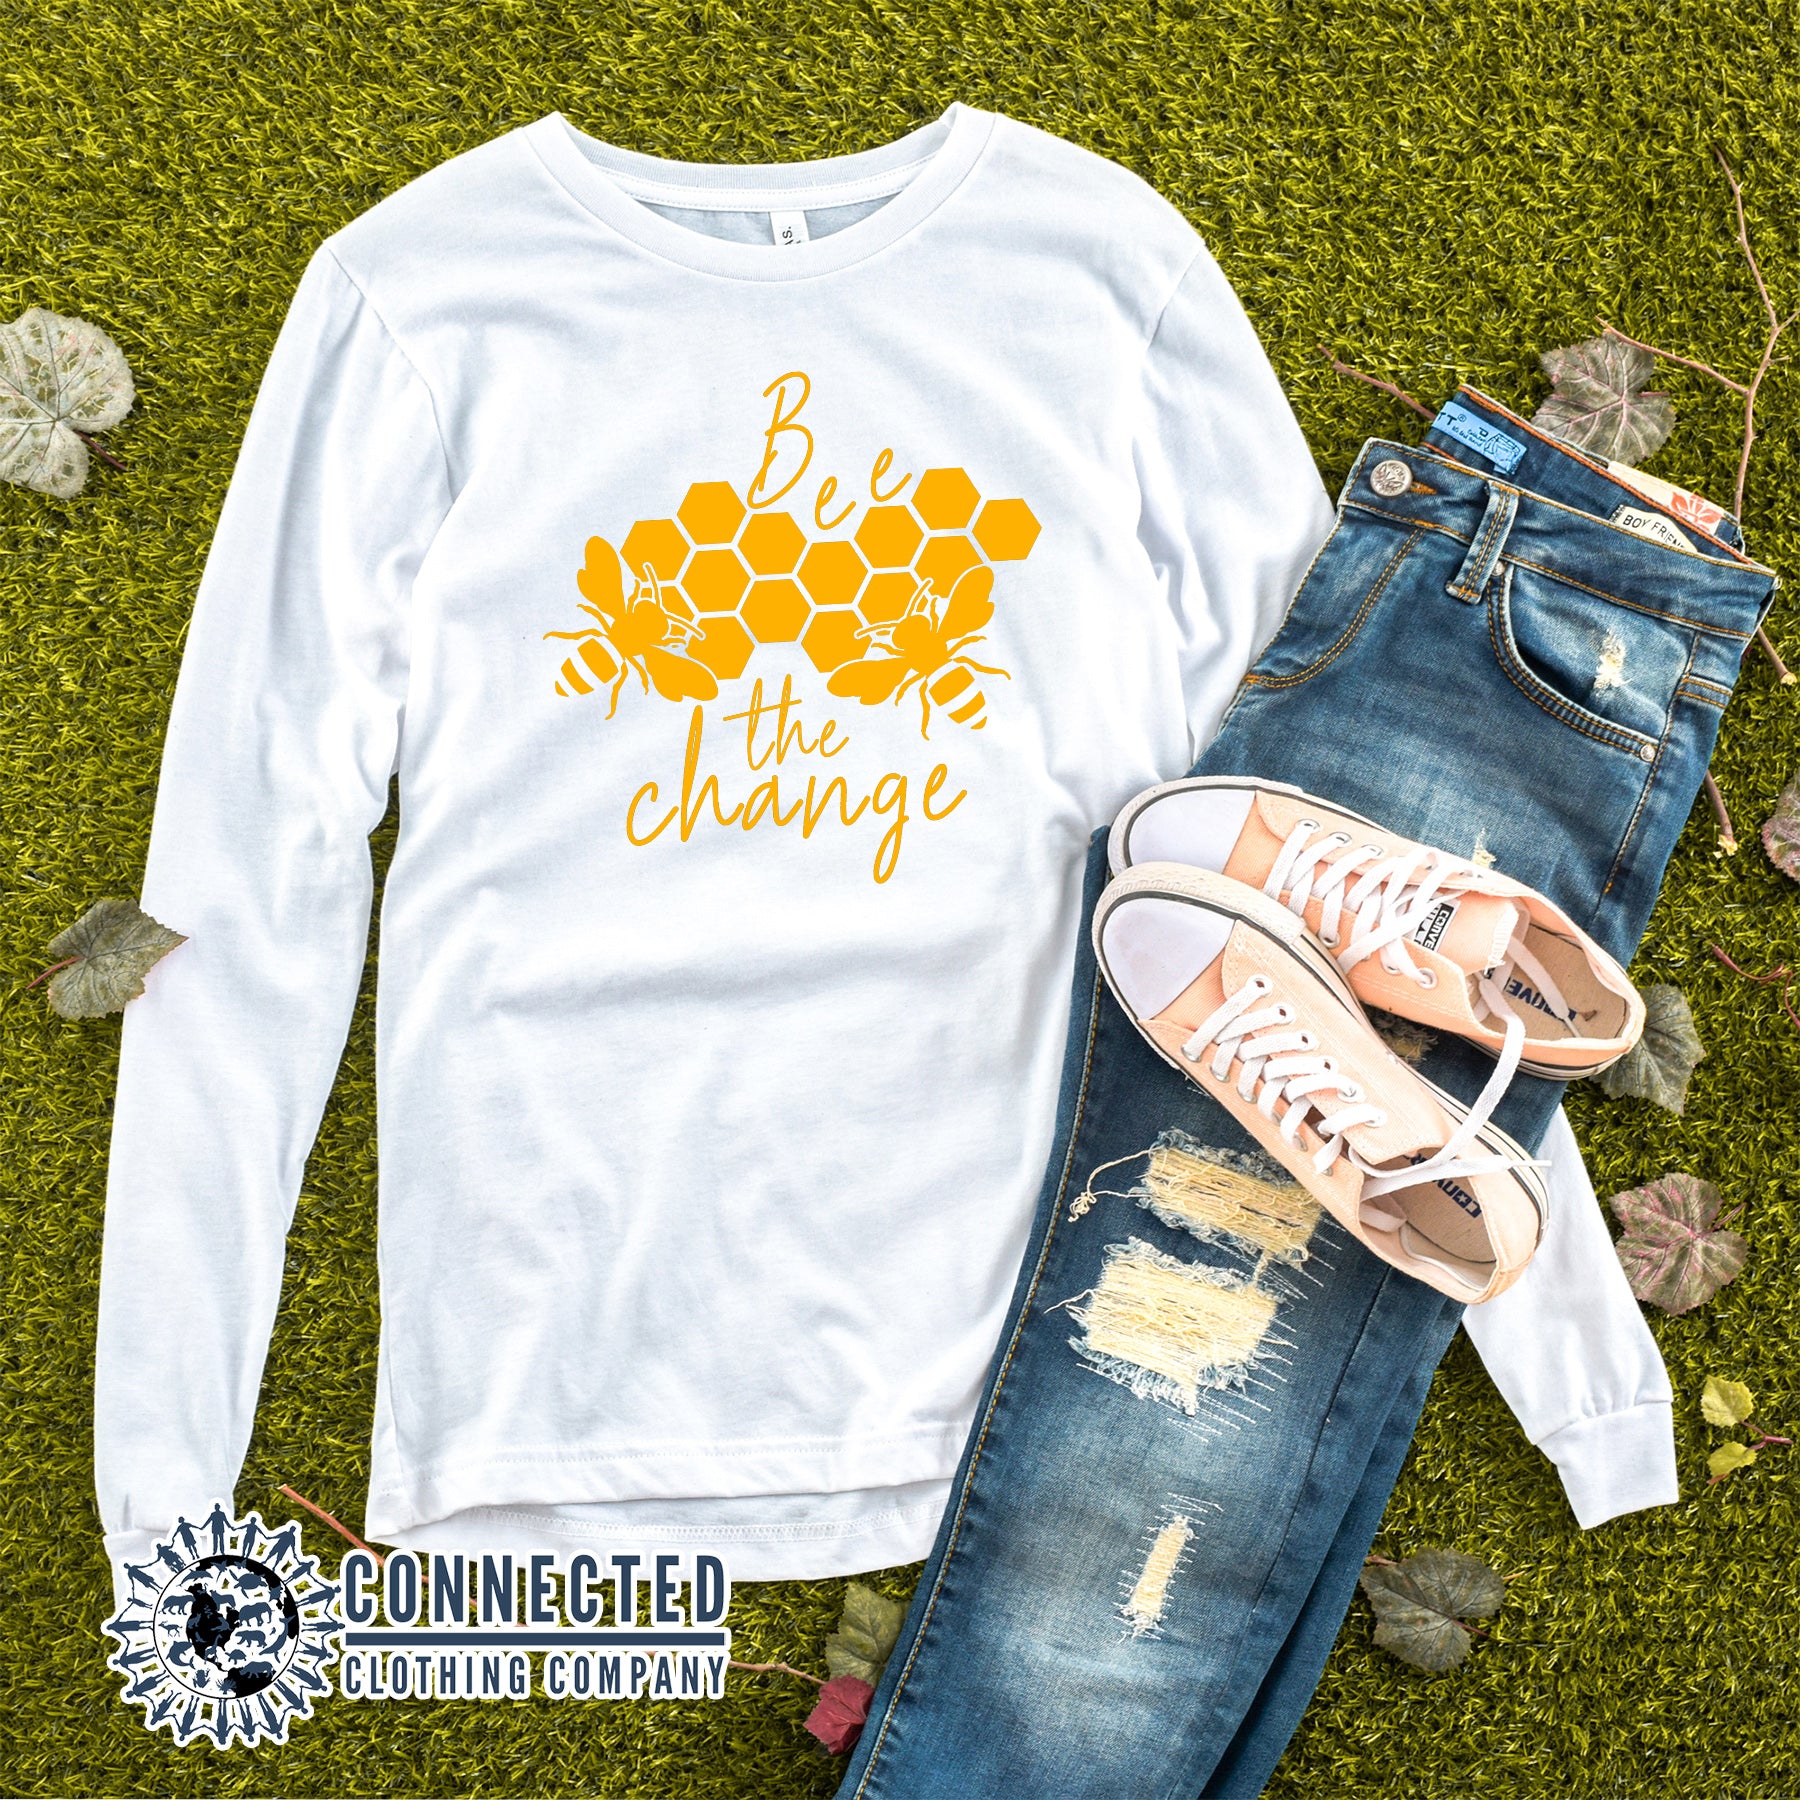 White Bee The Change Long-Sleeve Tee - Connected Clothing Company - Ethically & Sustainably Sourced - 10% of profits donated to The Honeybee Conservancy